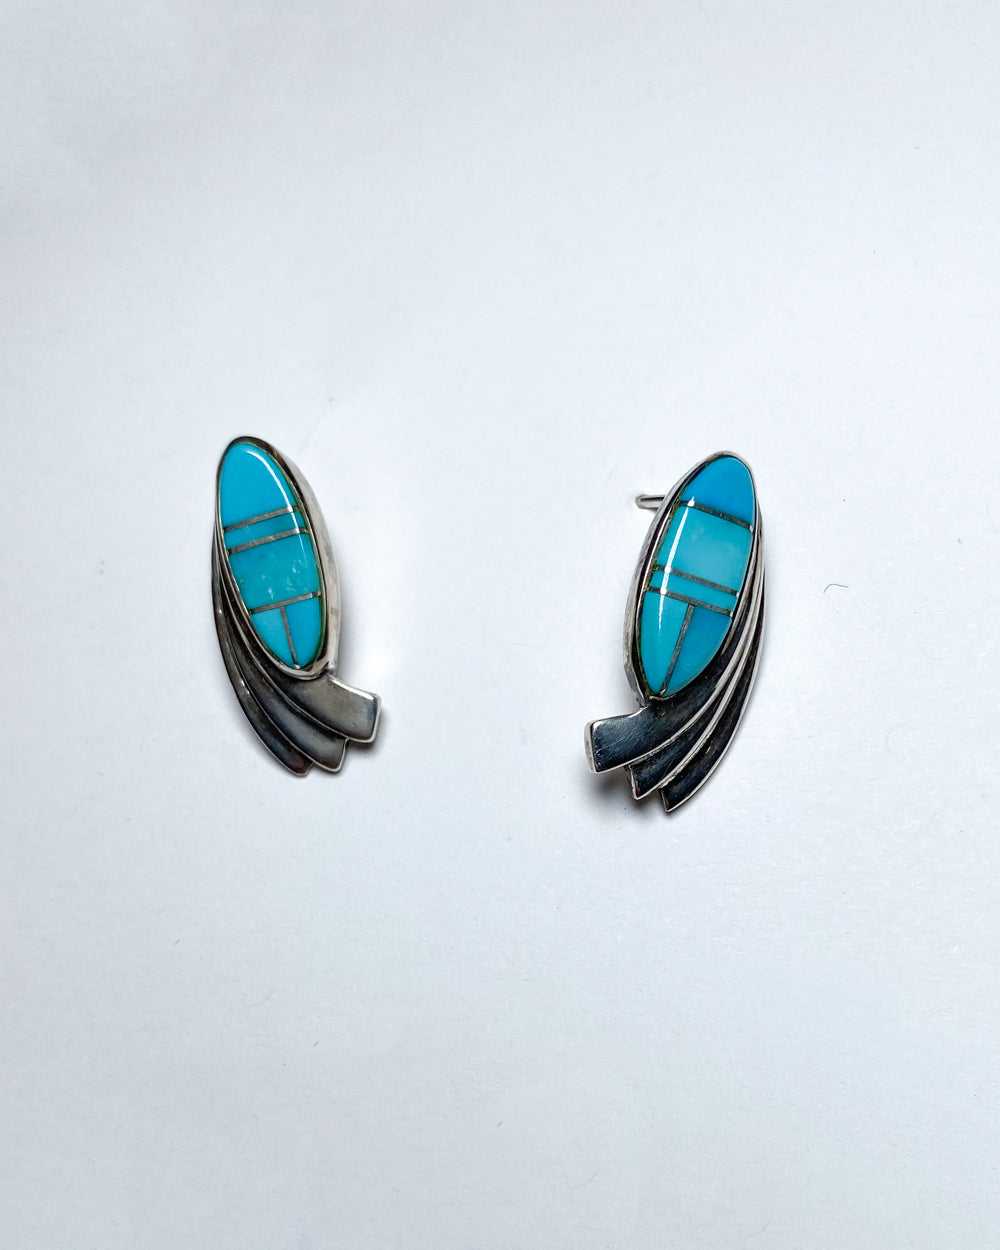 BGM / 925 Sterling Silver with Turquoise Earring - image 3